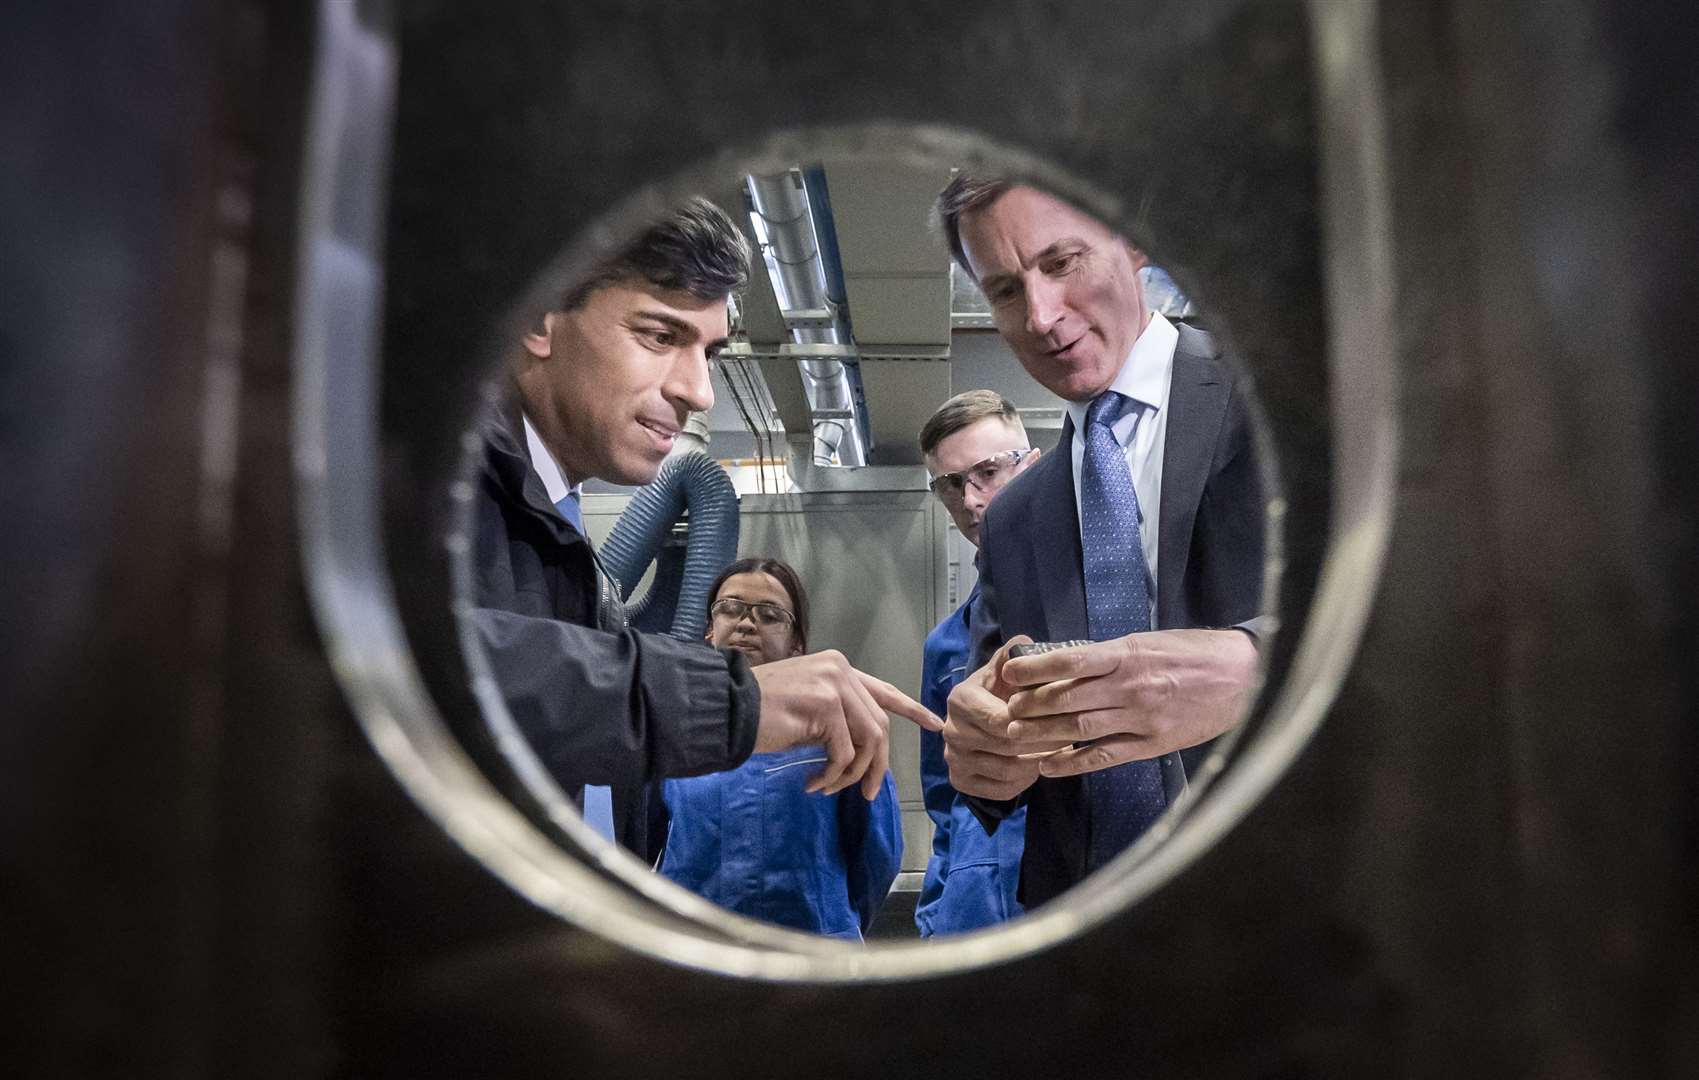 Prime Minister Rishi Sunak and Chancellor Jeremy Hunt during a visit to BAE Systems Submarines in Barrow-in-Furness, Cumbria (Danny Lawson/PA)